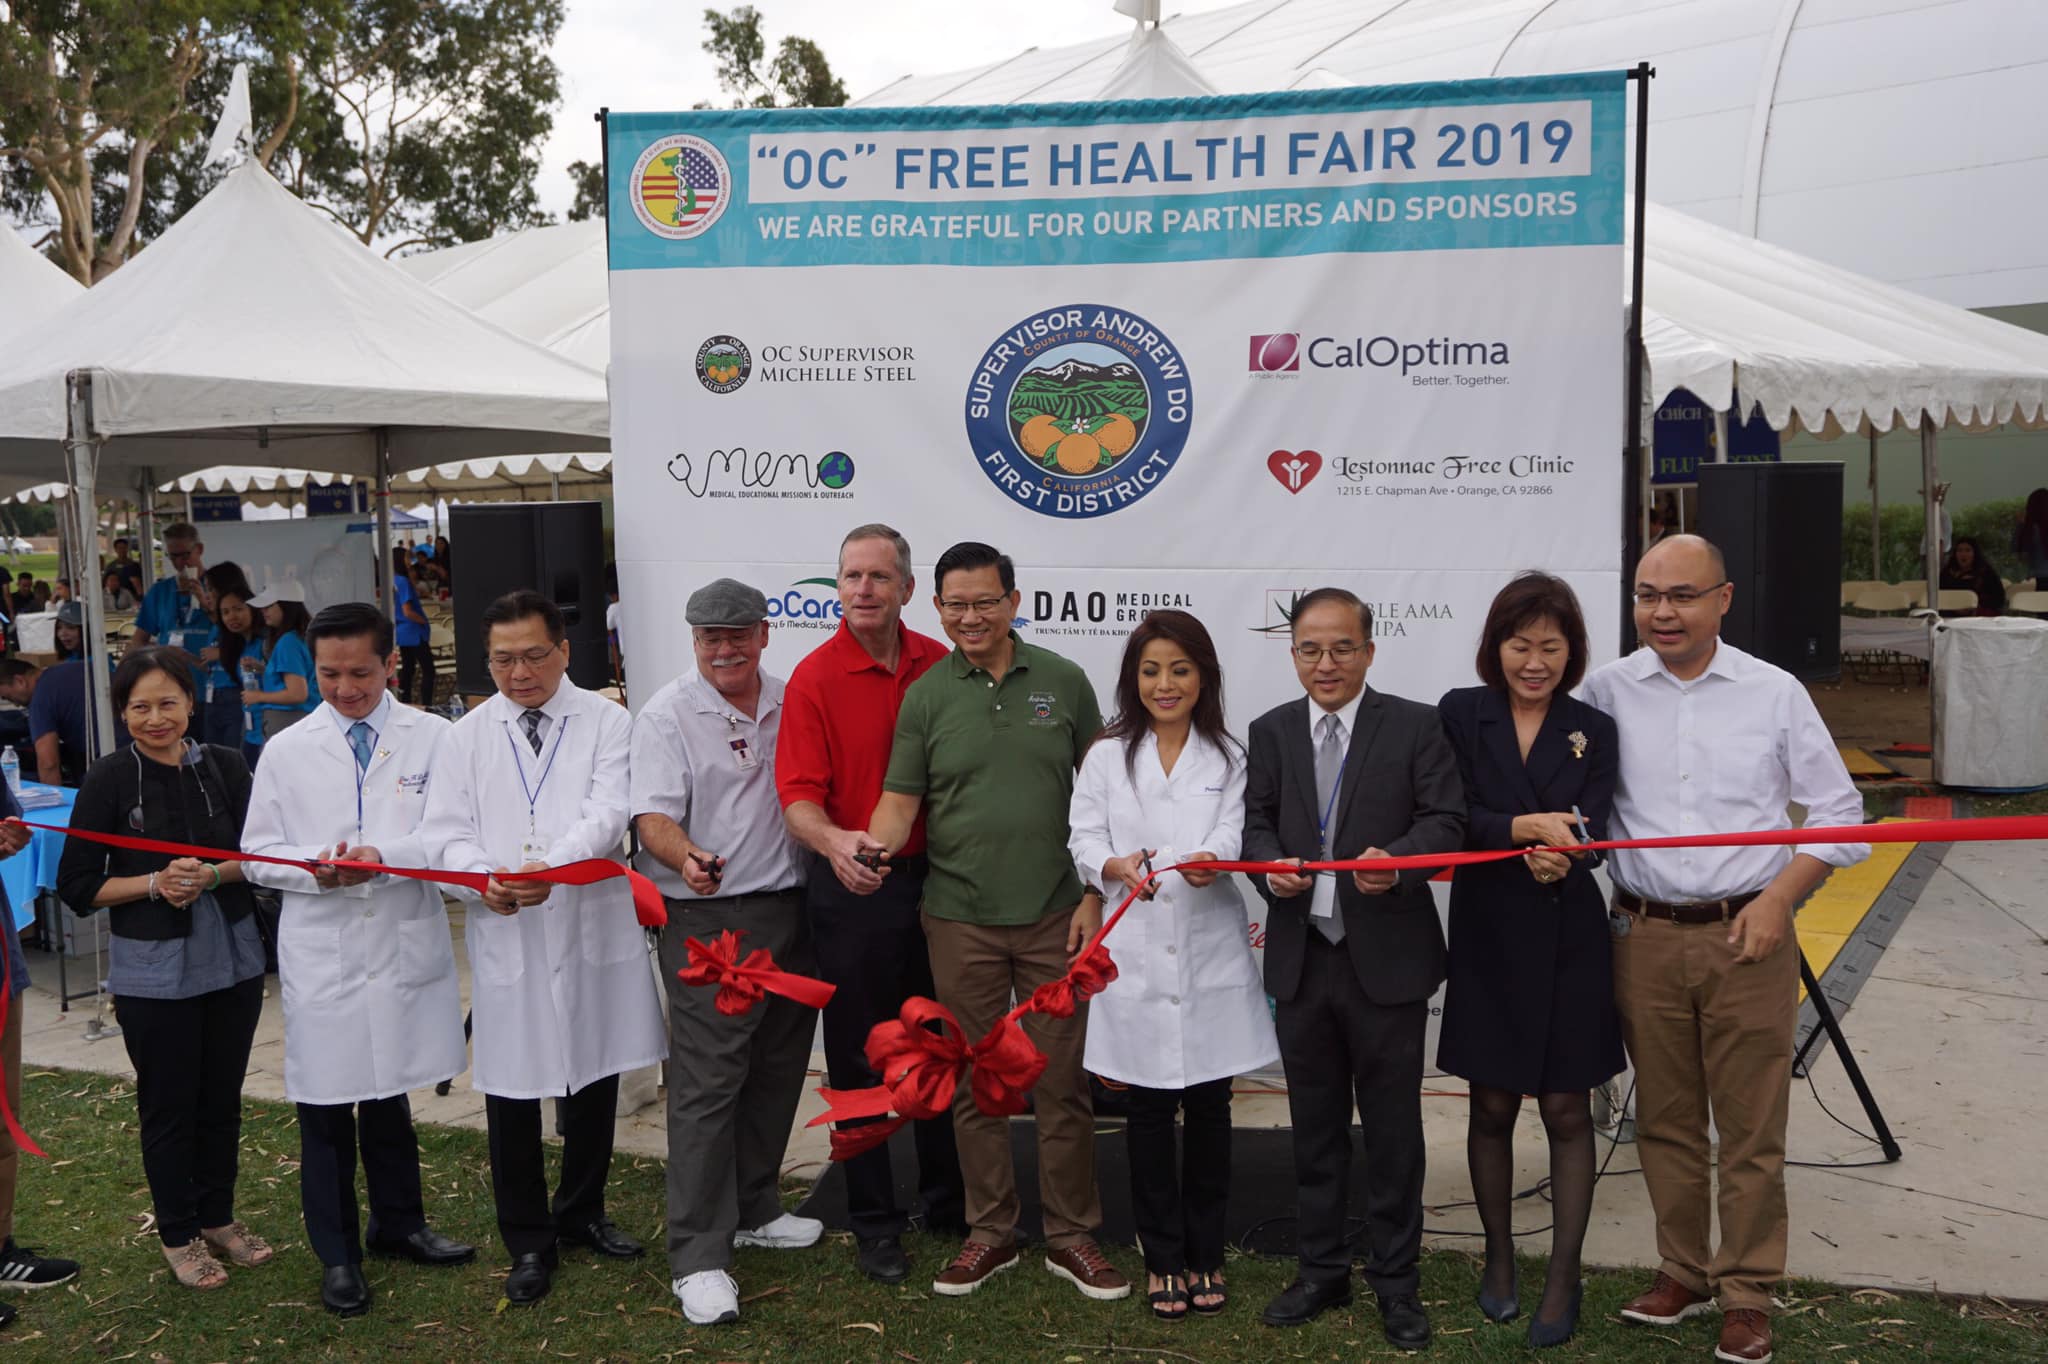 Health Care: More than 2,500 Medical Treatments Were Provided at Orange County’s Largest Free Health Fair